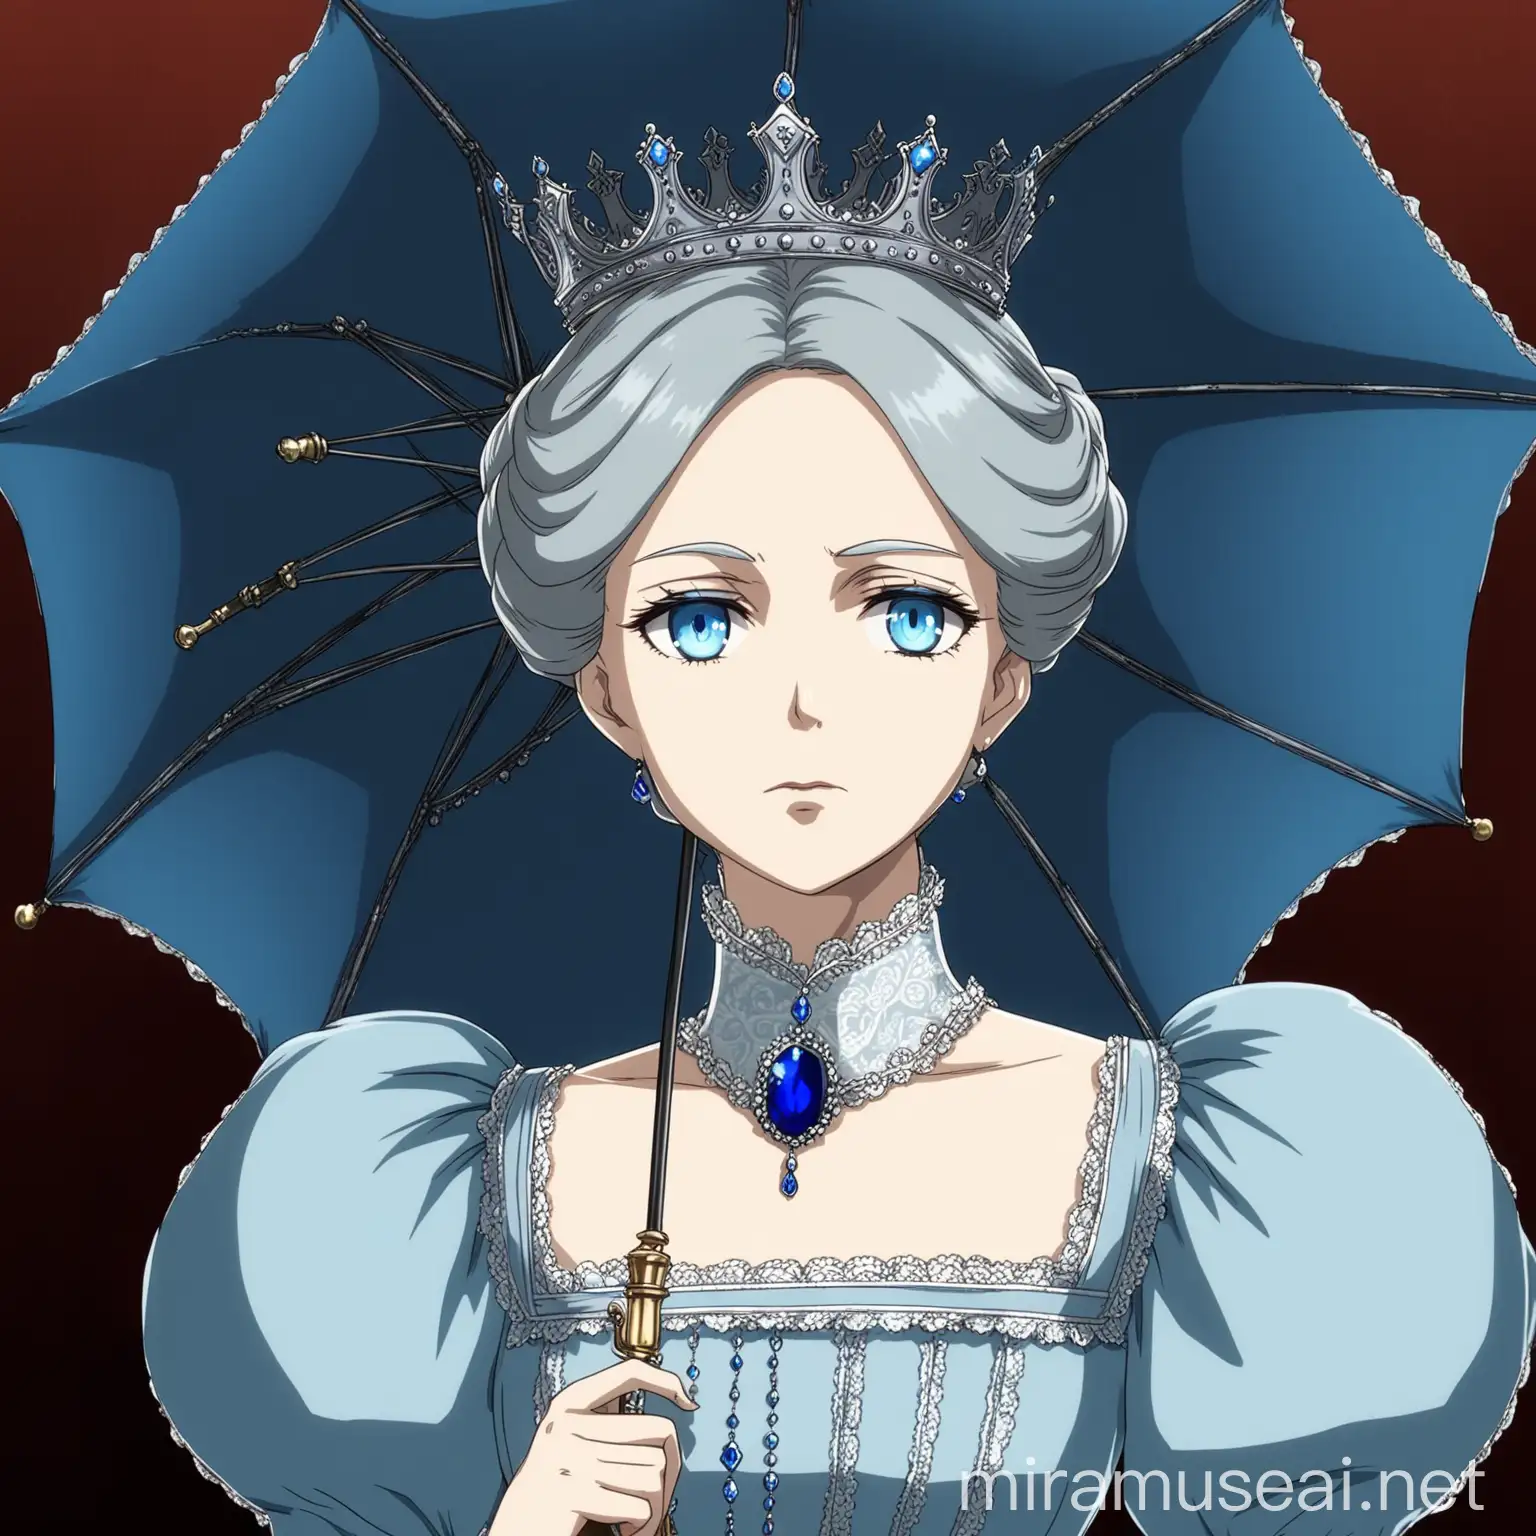 Victorian Anime Queen with Blue Umbrella and Silver Crown